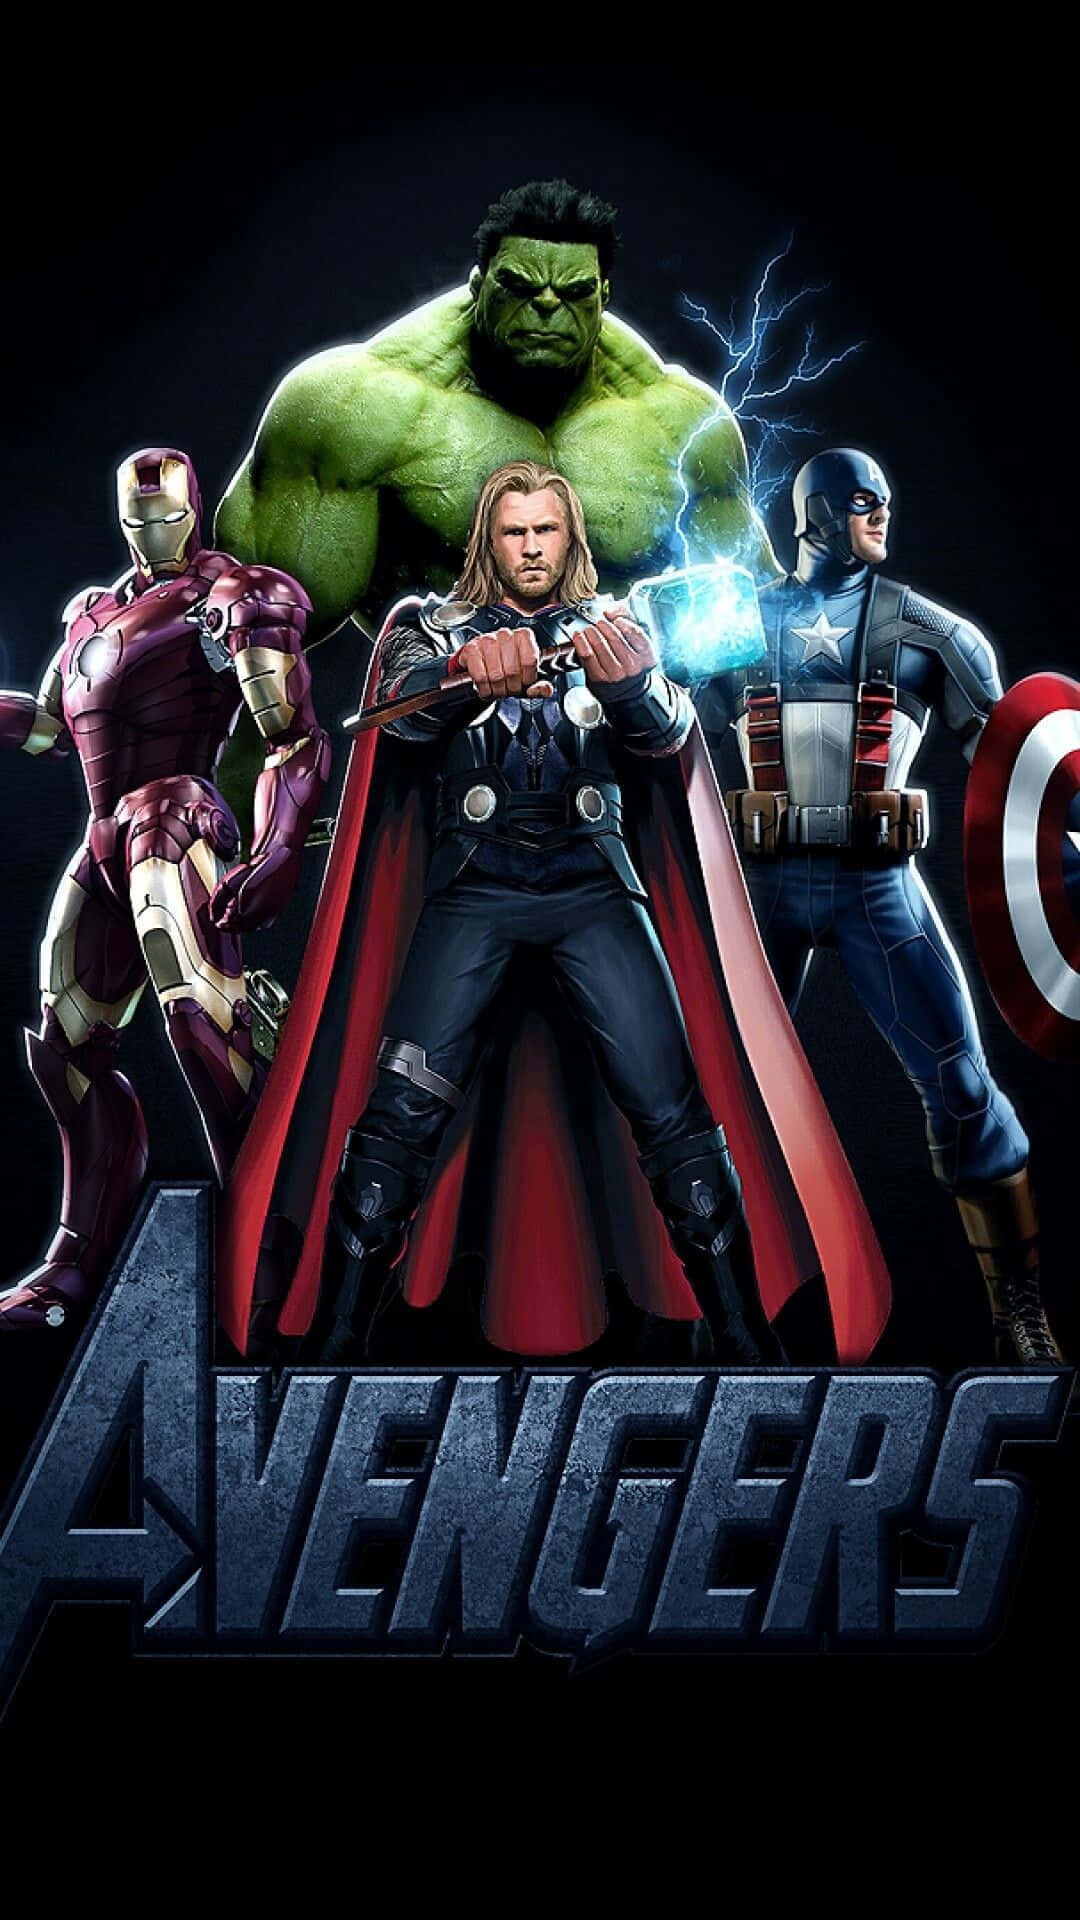 Android Marvel's Avengers Ironman, Thor, Hulk, And Captain America Background